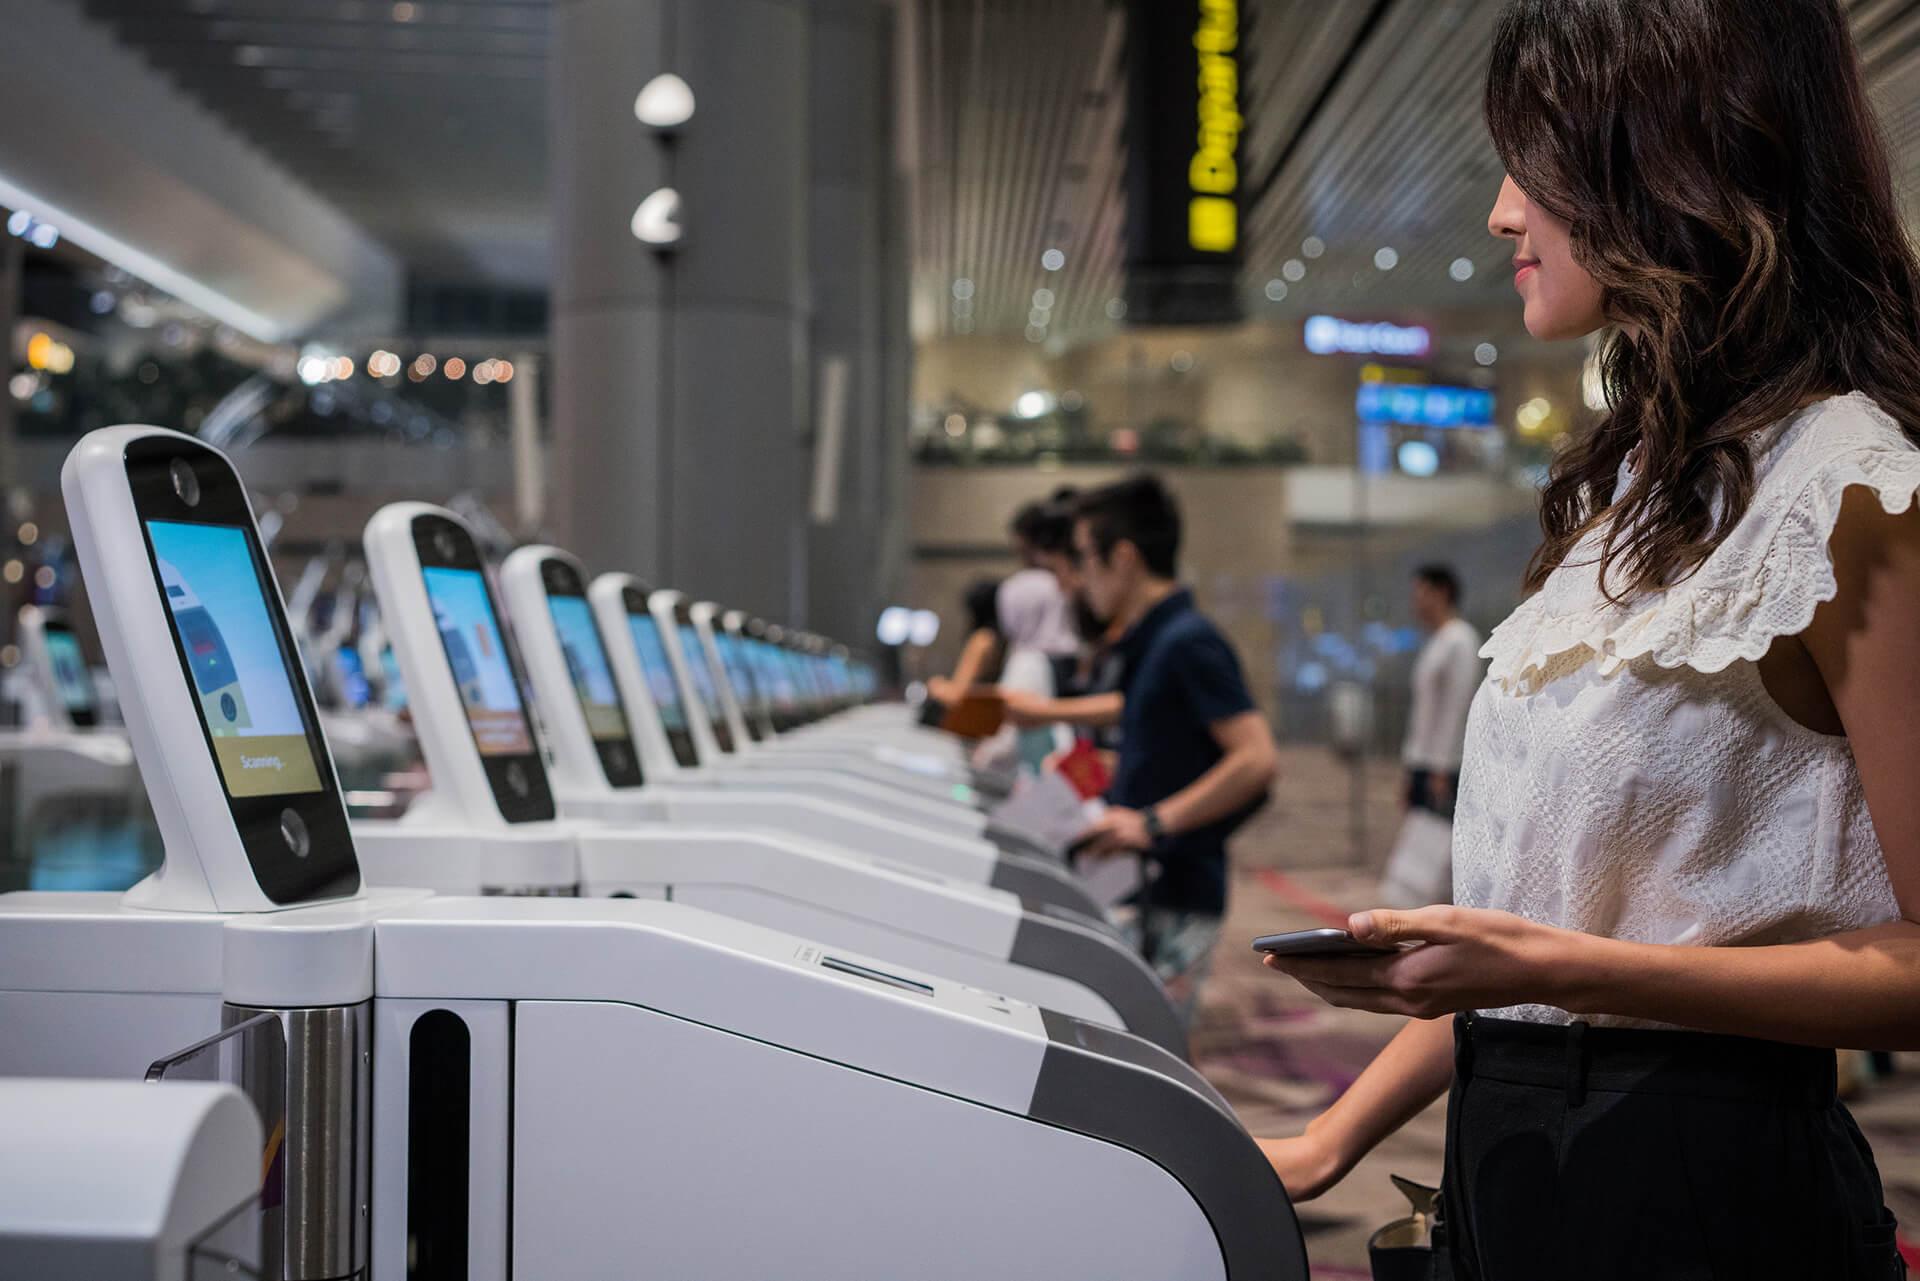 Singapore Changi Terminal 4 offers premium experience with automated  facilities – Business Traveller